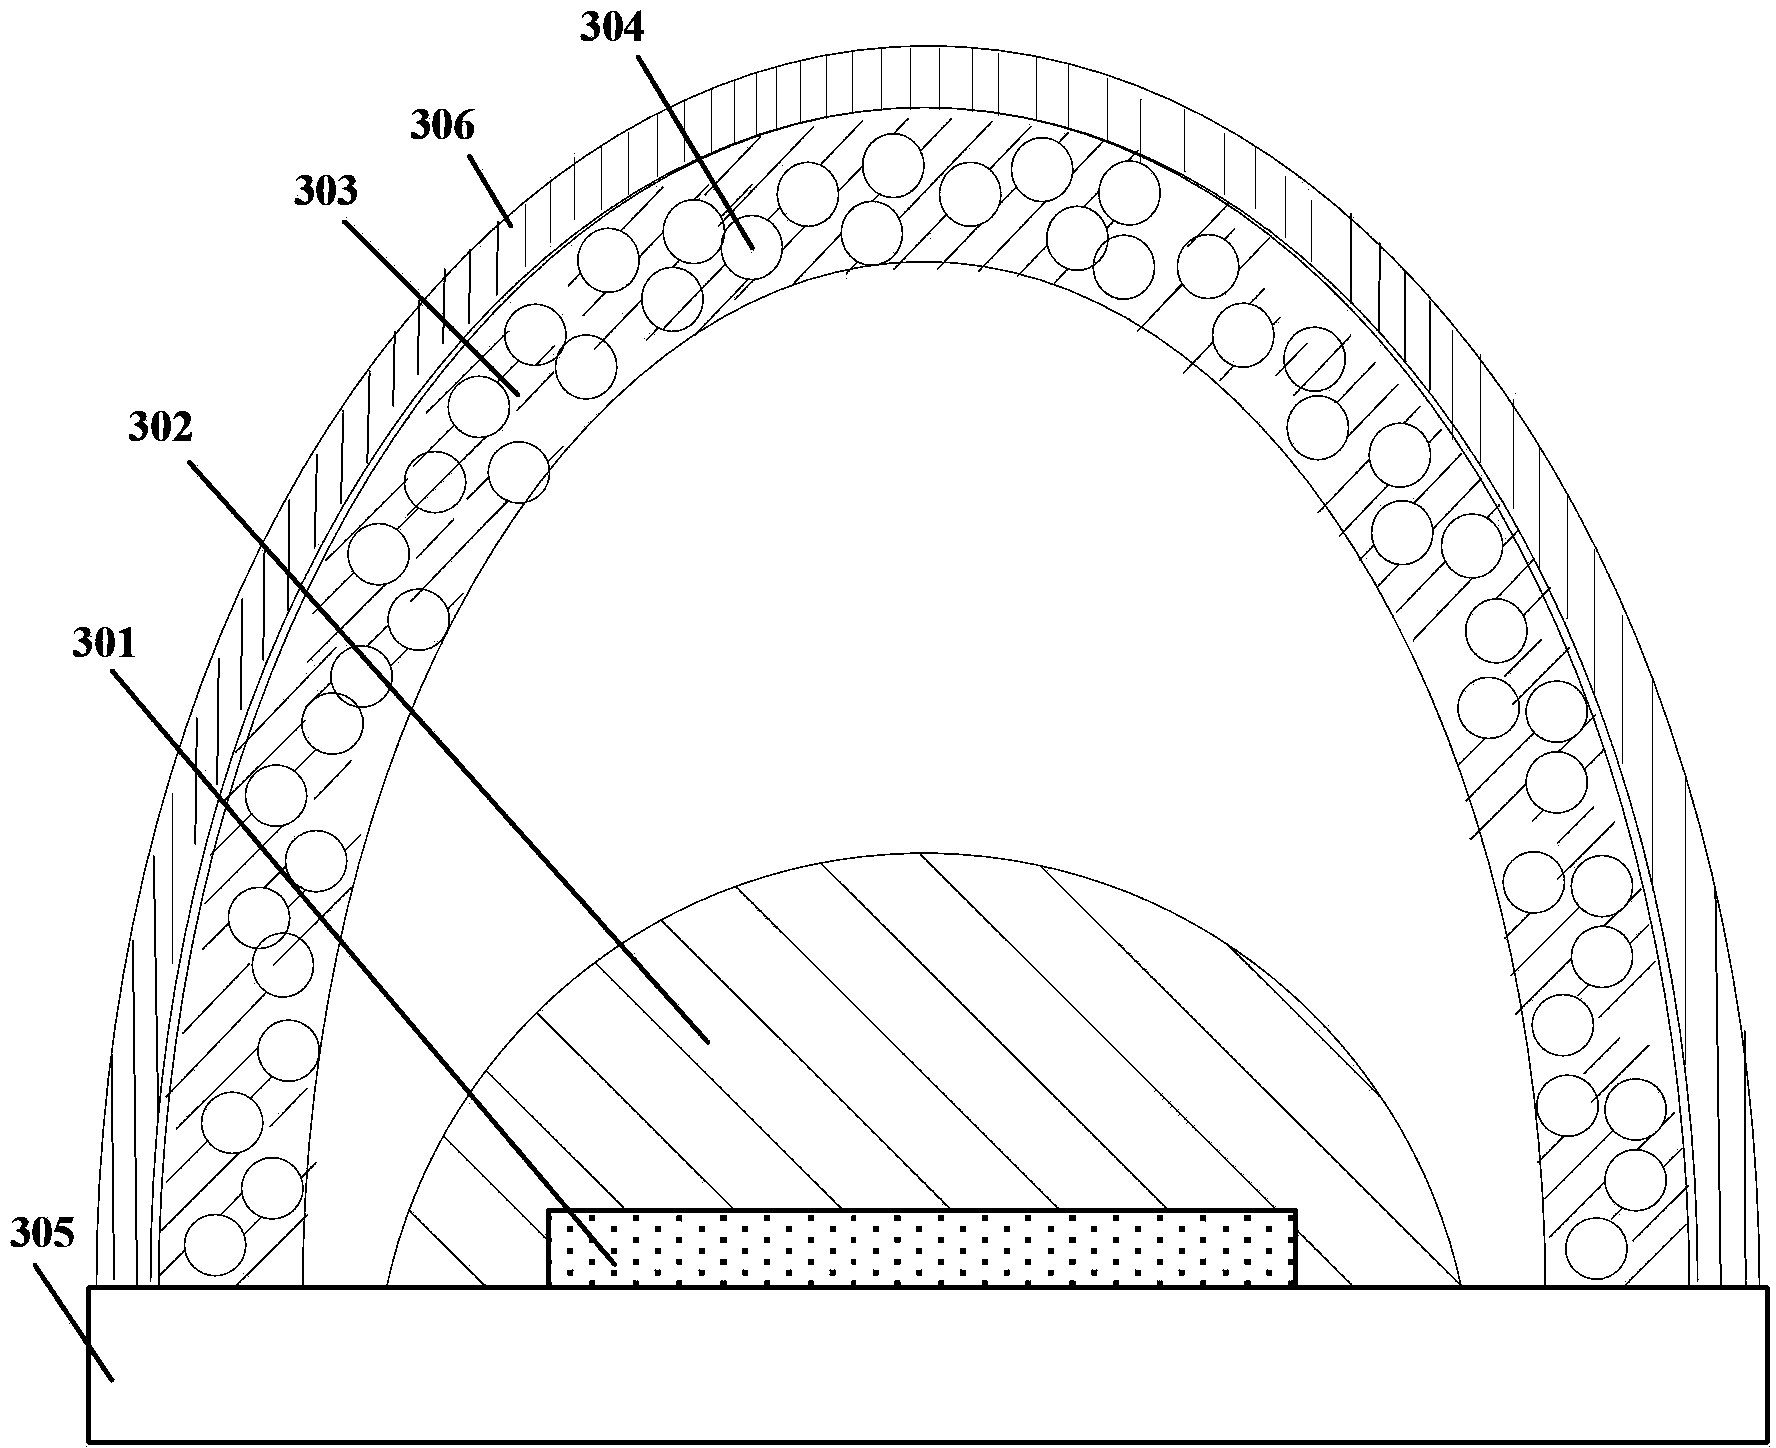 LED and display device